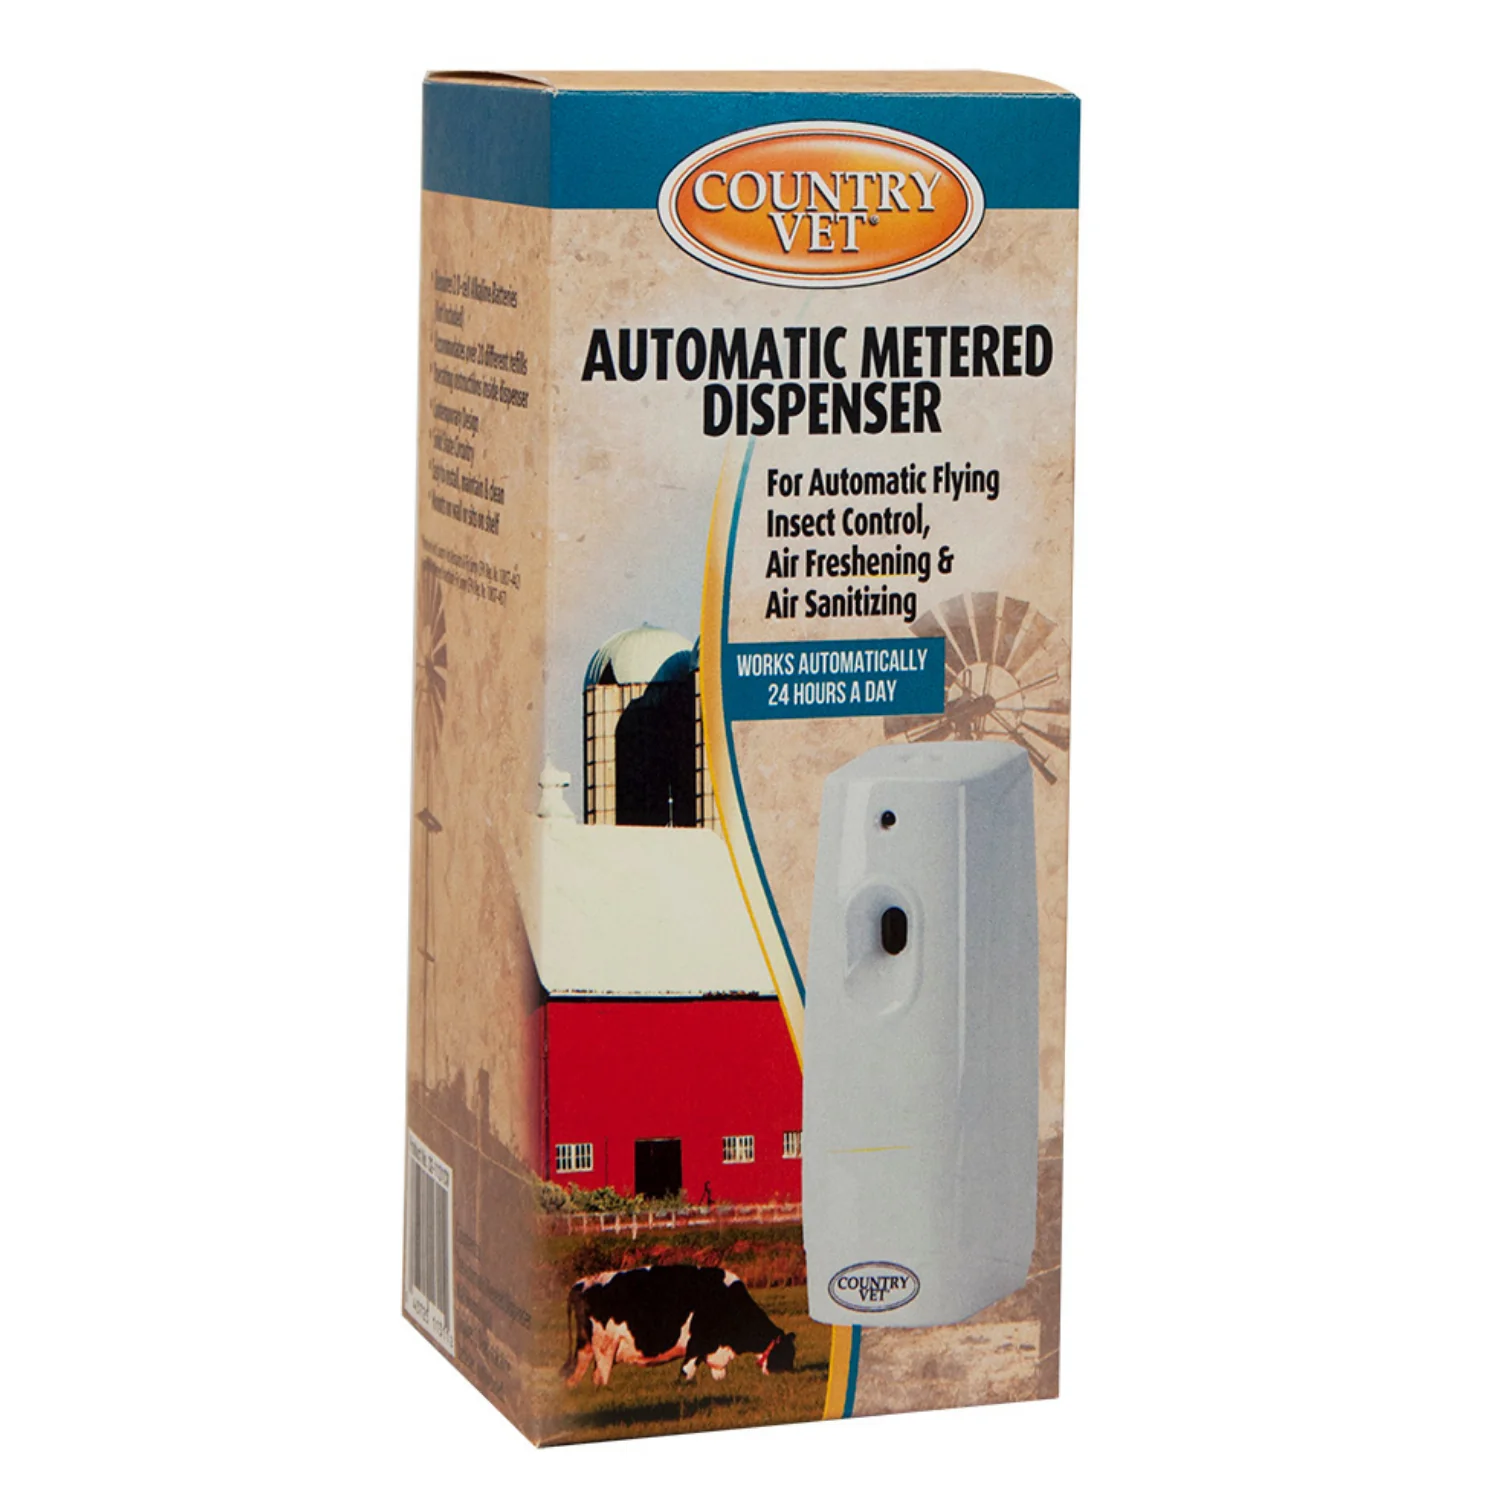 Country Vet Automatic Metered Dispenser Box